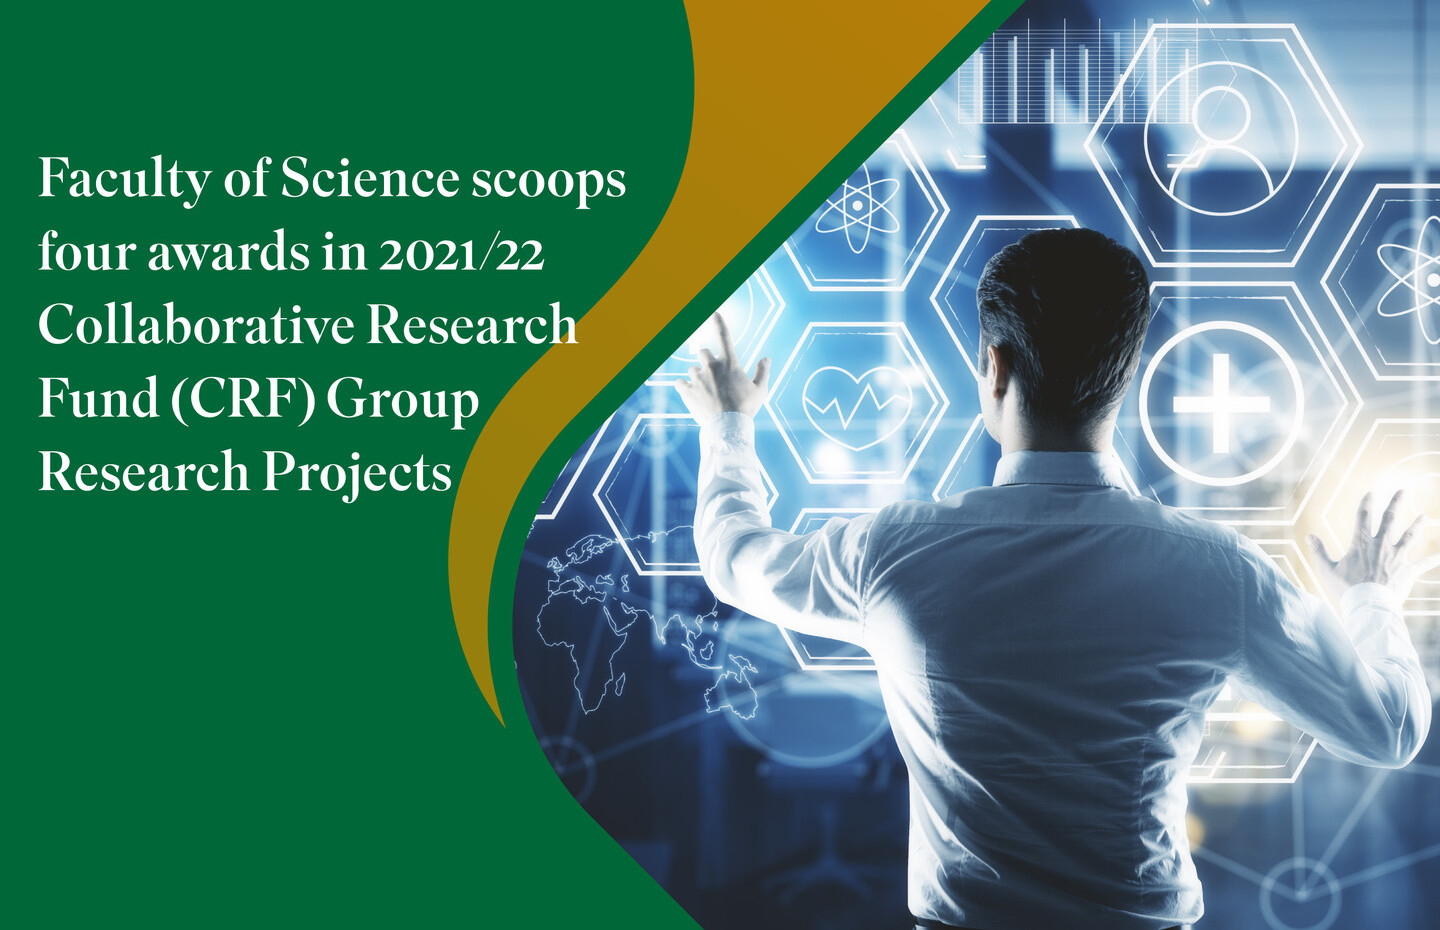 Faculty of Science scoops four awards in 2021/22 Collaborative Research Fund (CRF) Group Research Projects